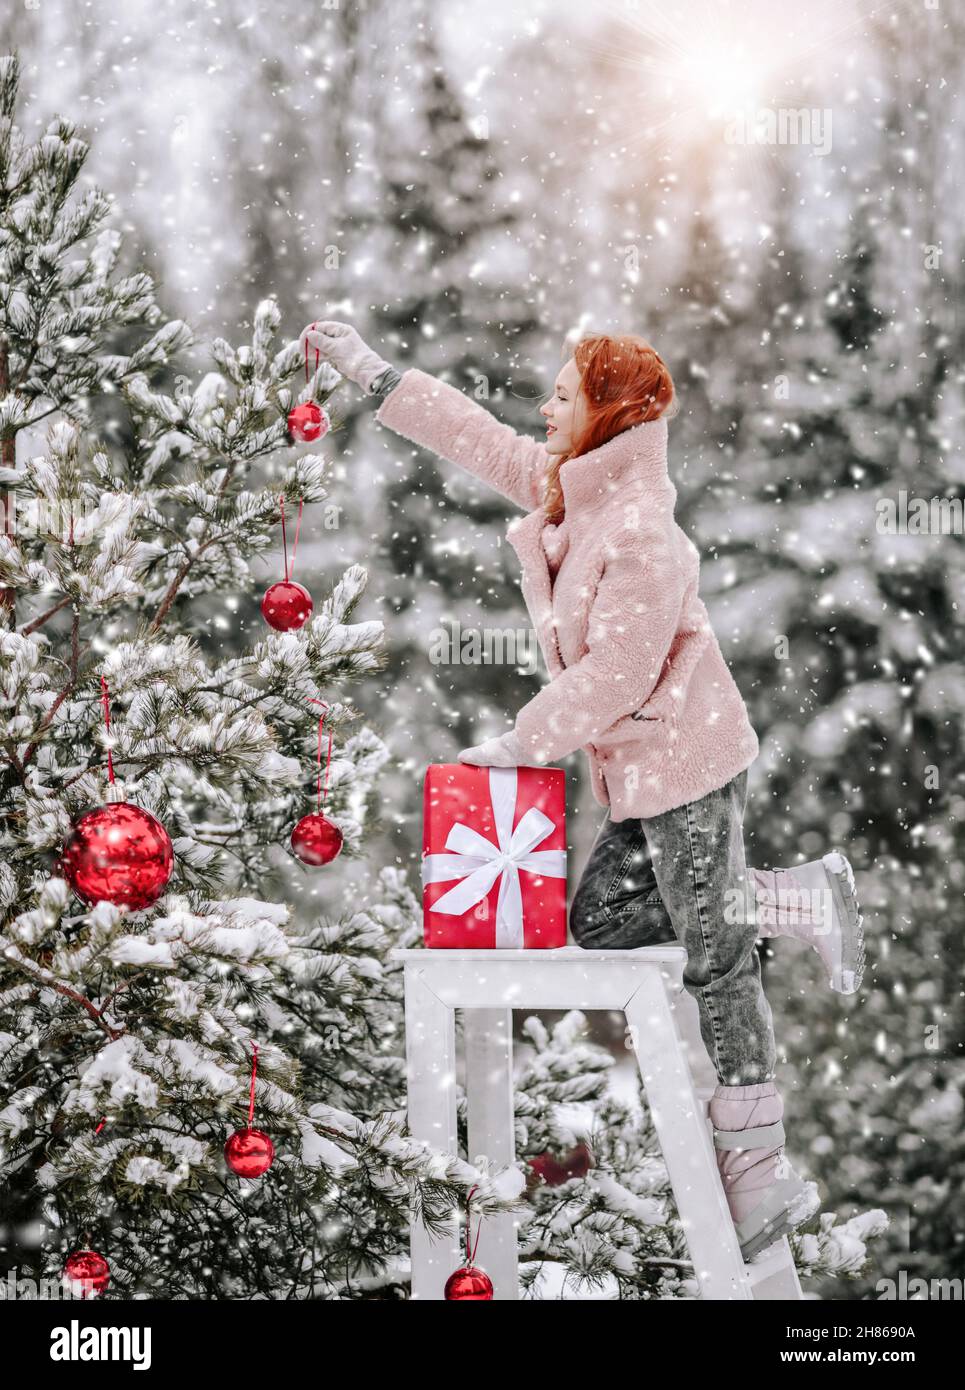 Young woman in warm clothing pink fur coat standing and decorating Christmas tree with balls outdoors in winter snowy forest Stock Photo